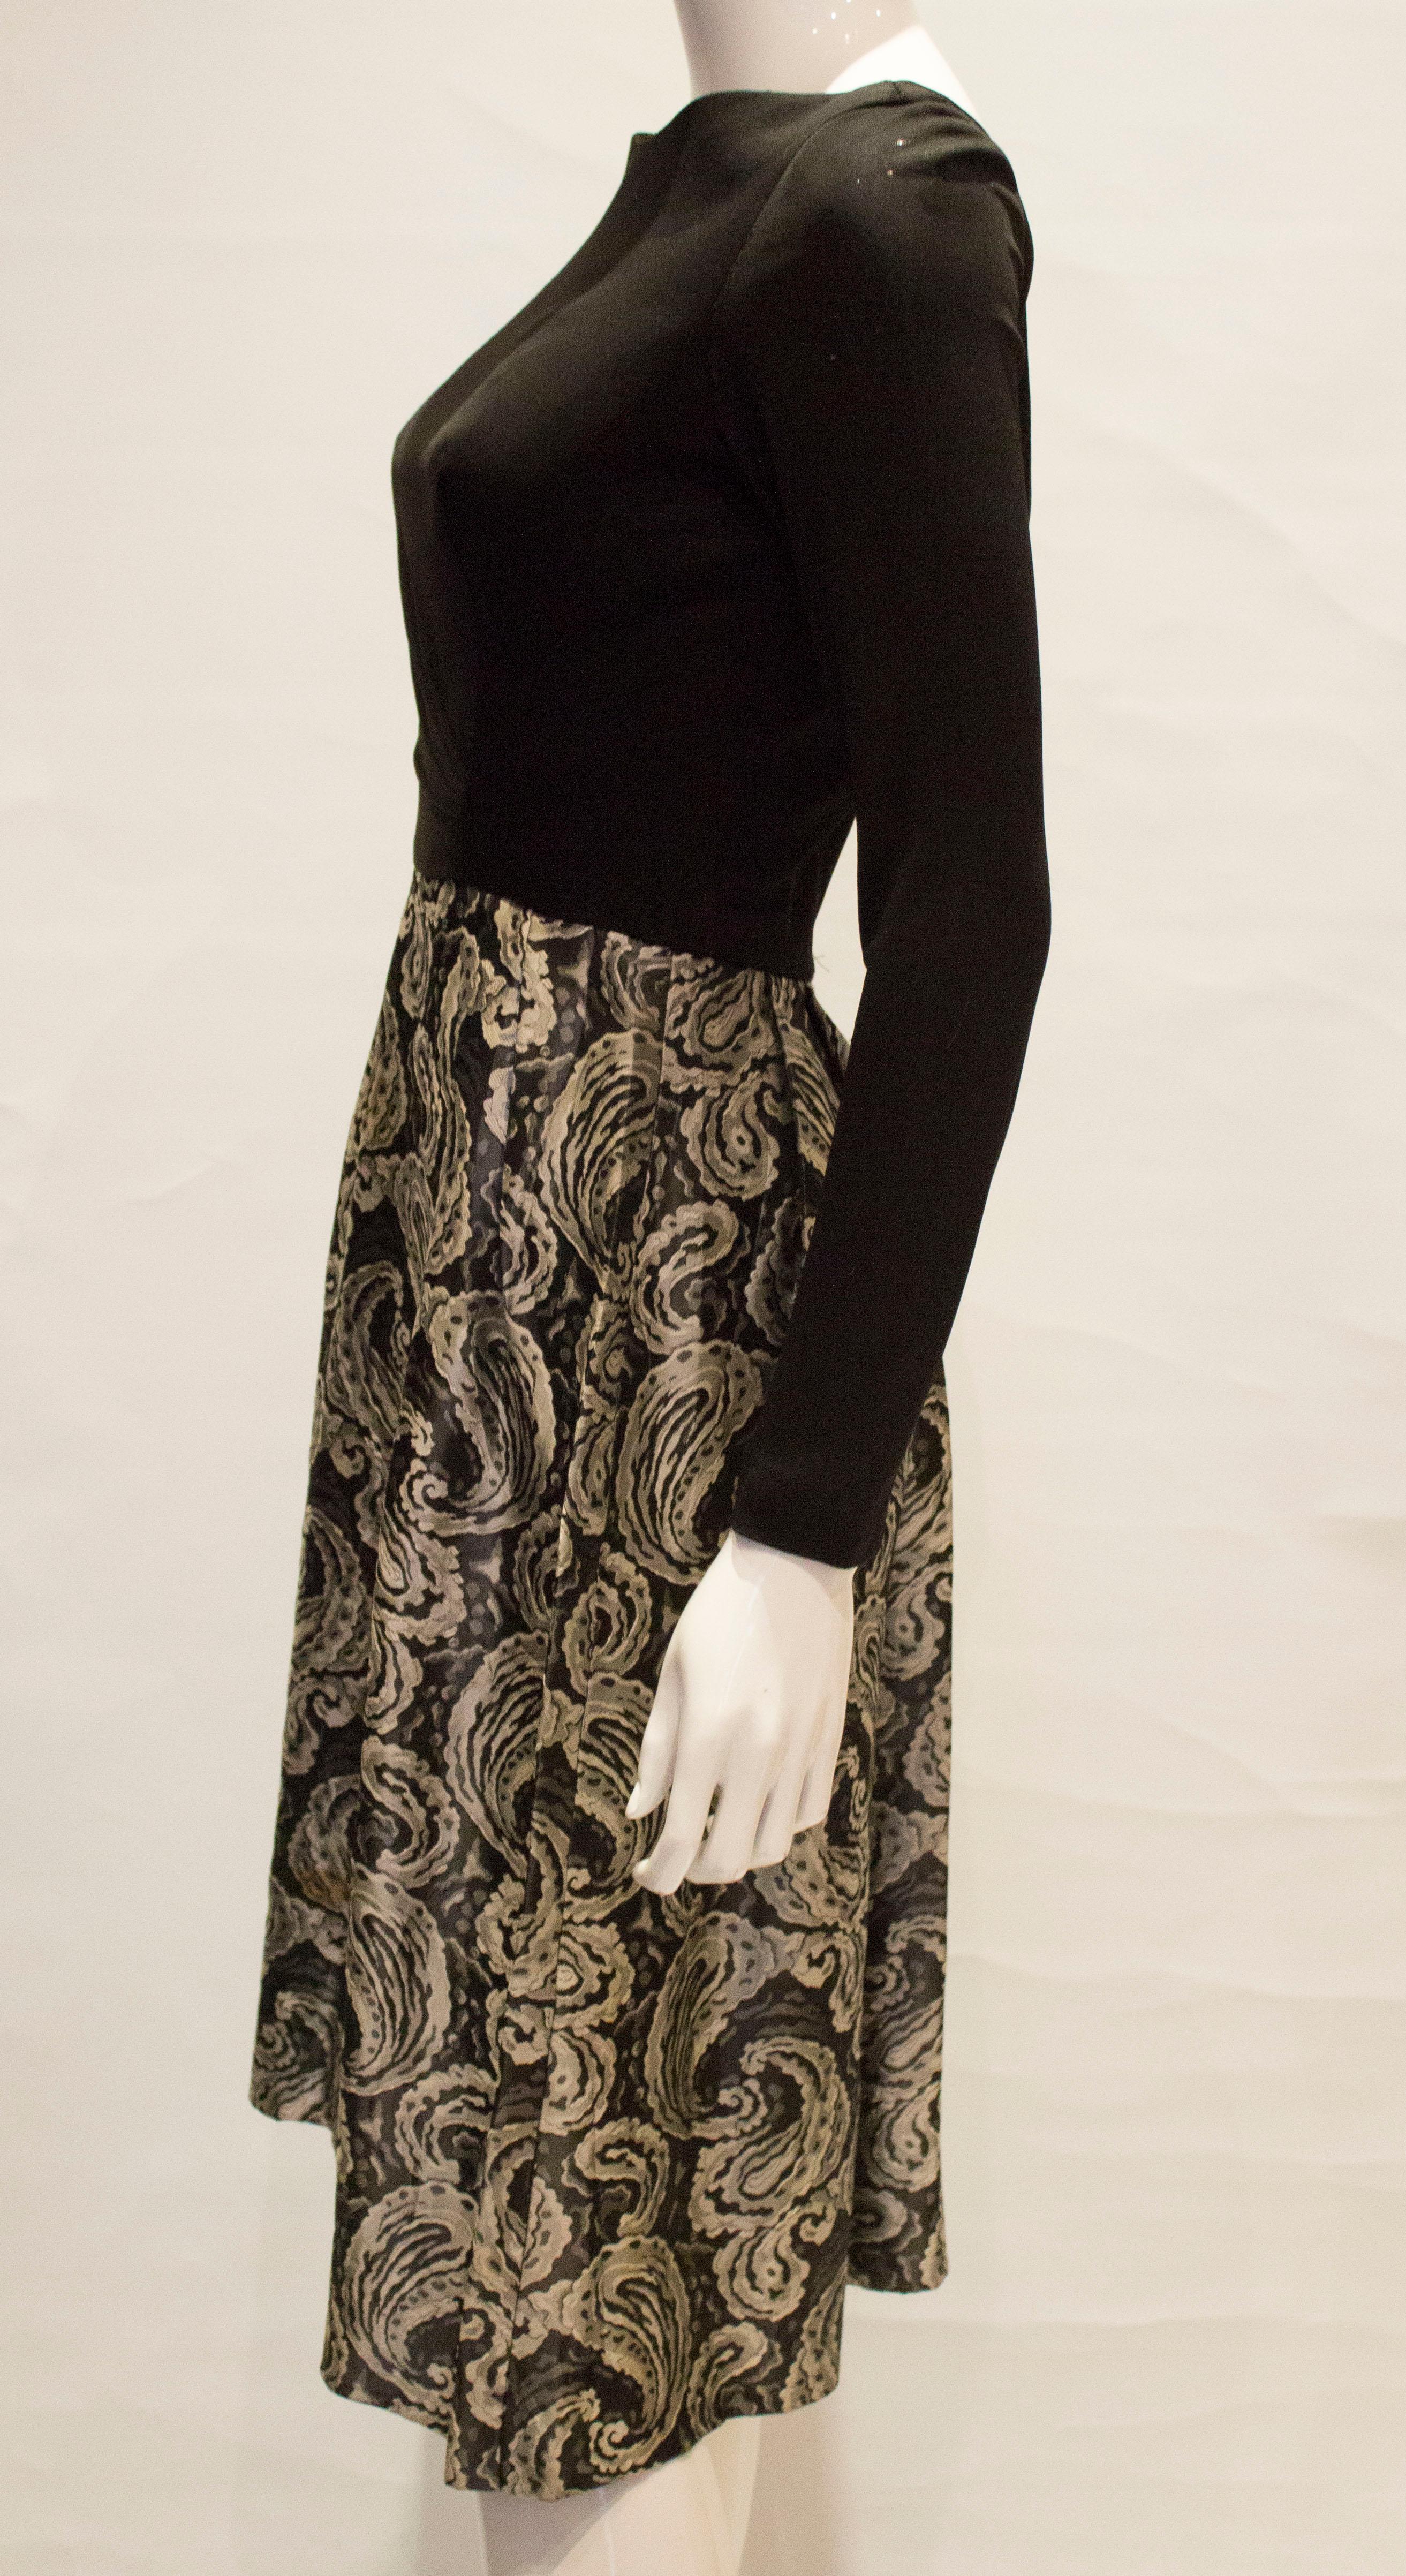 Black A vintage 1950s silver and black brocade party low back paisley dress small